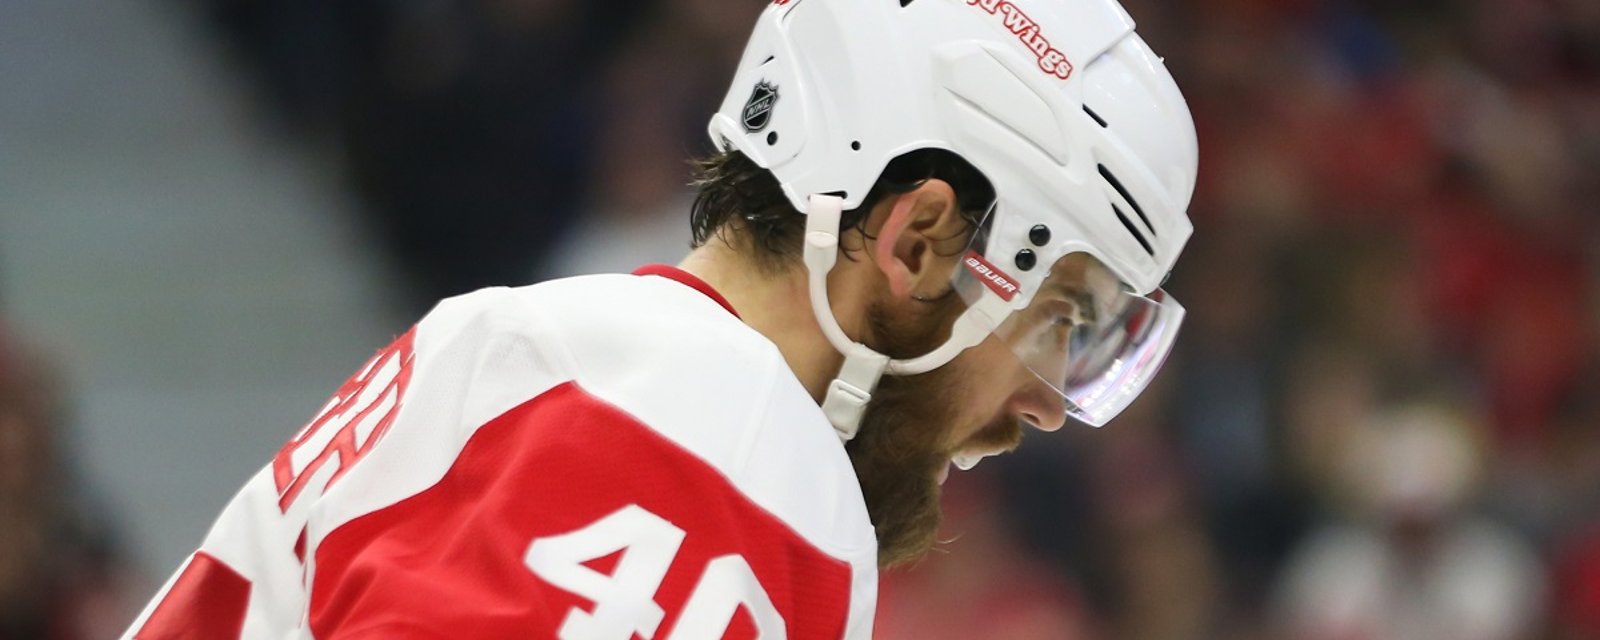 Video: Emotional Zetterberg livid with his team after tough loss.